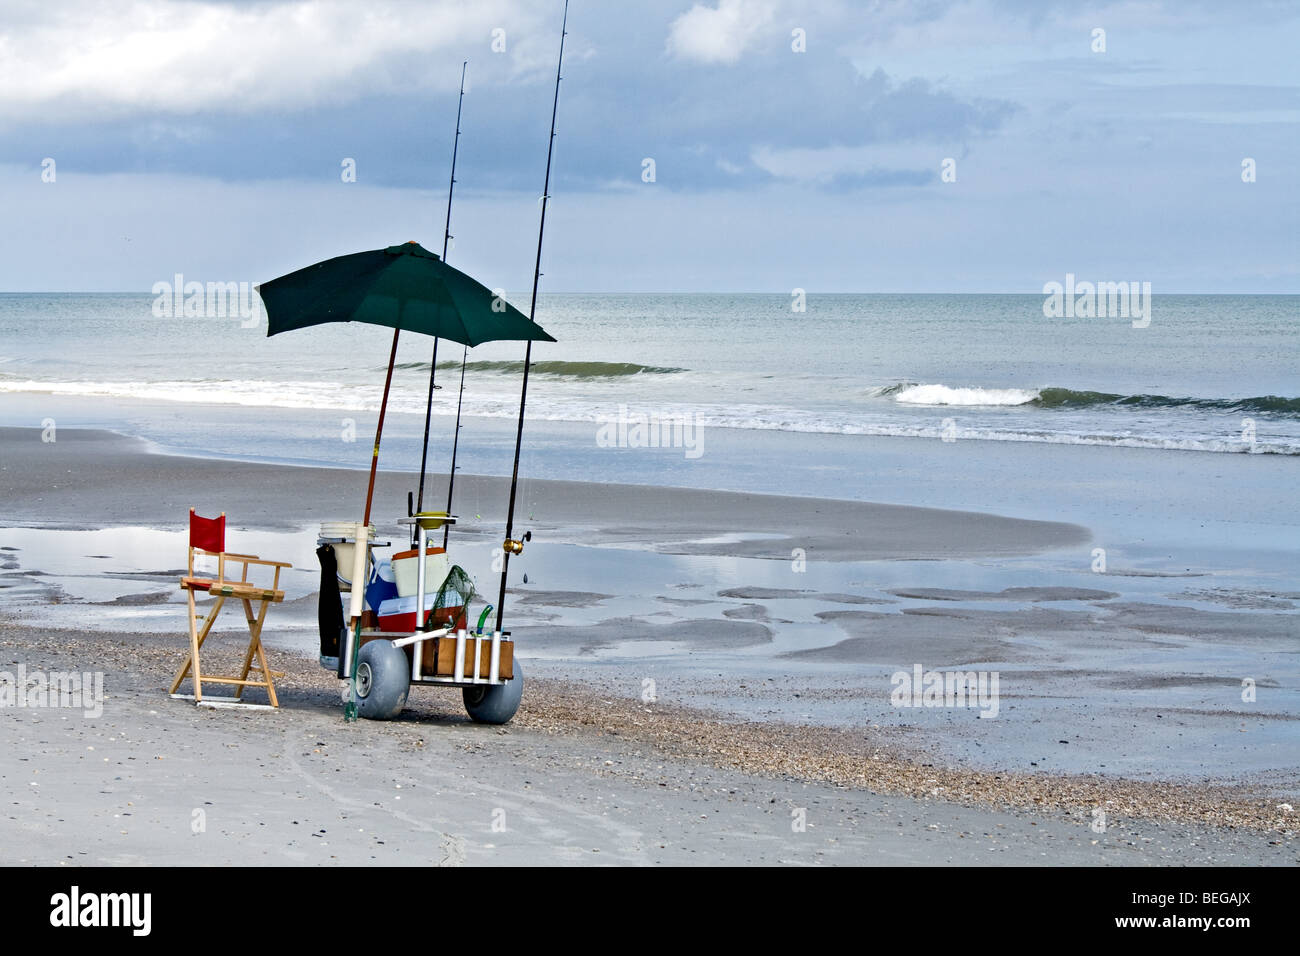 Fishing gear, umbrella and cooler on a wheeled cart on the beach